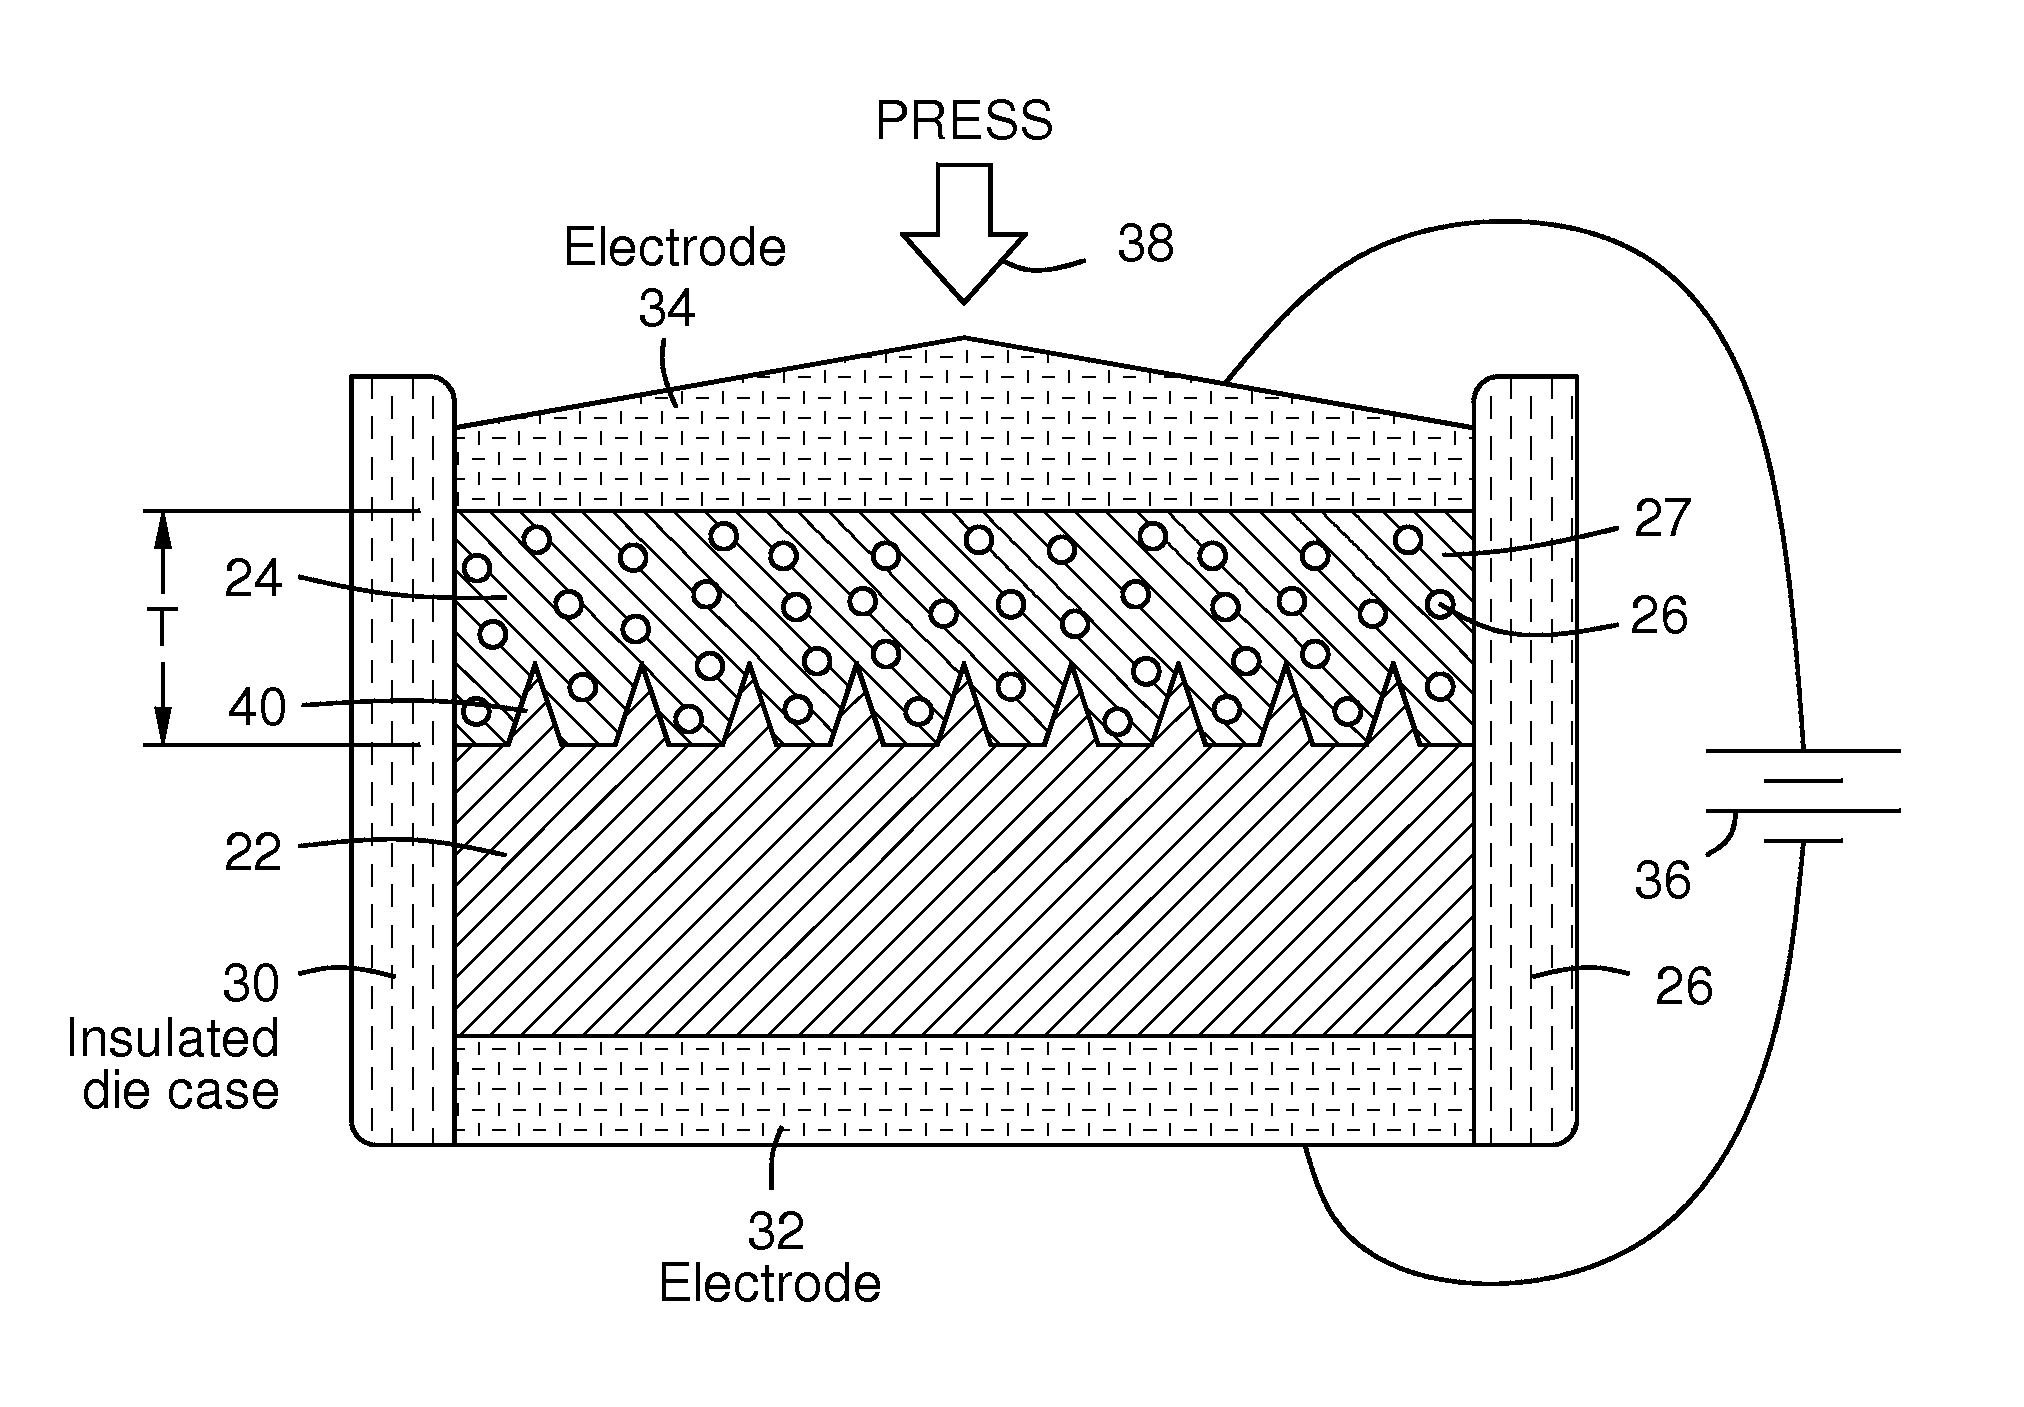 Powder-based material system with stable porosity